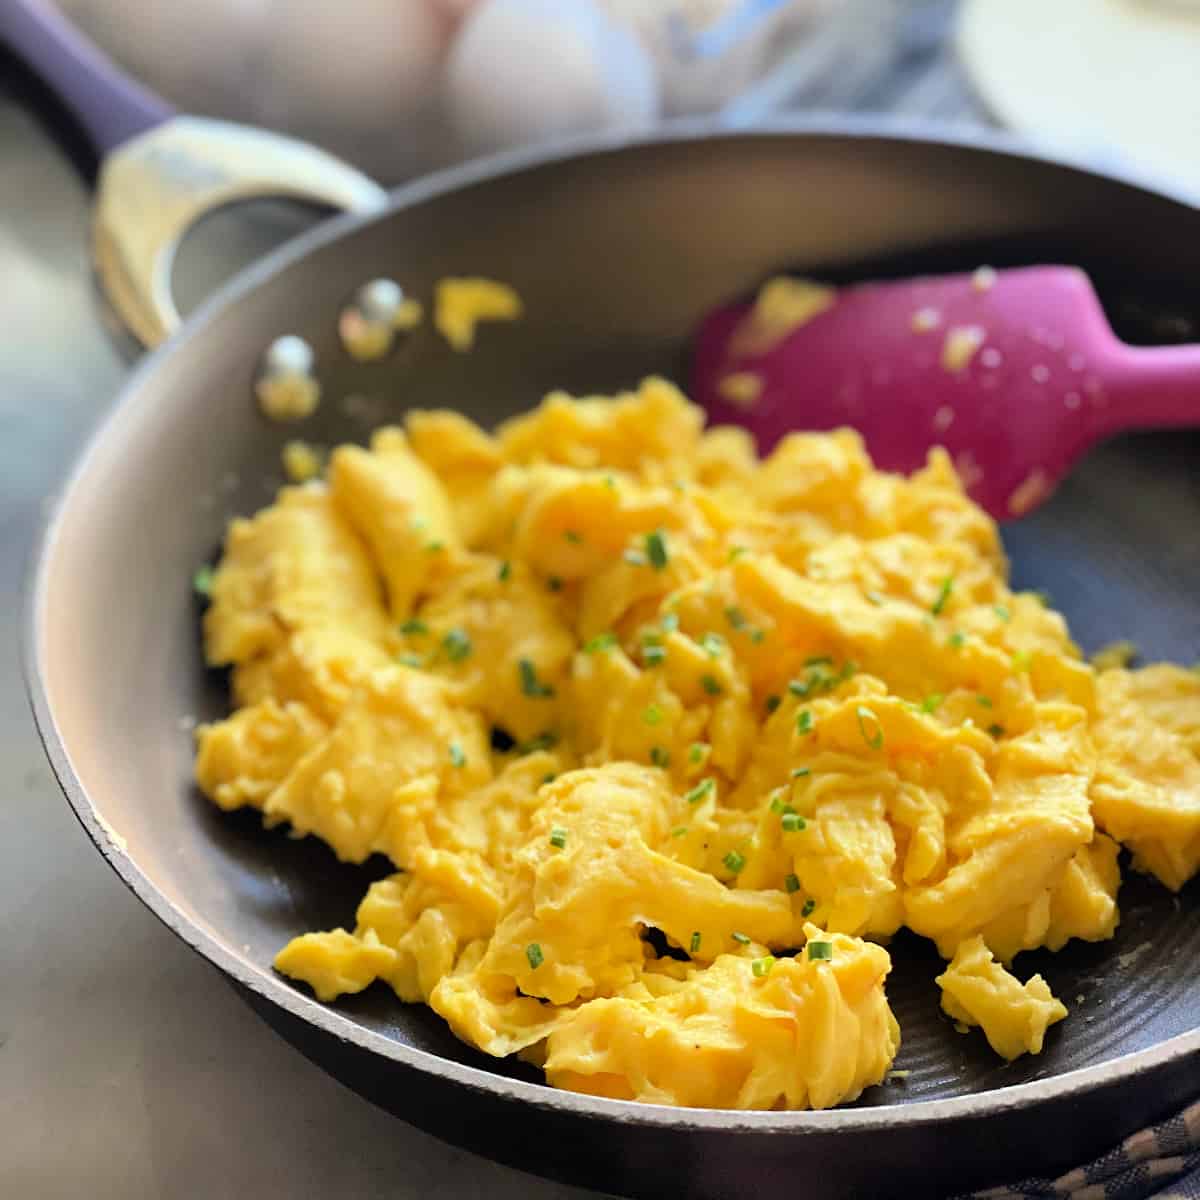 https://www.katiescucina.com/wp-content/uploads/2022/01/Scrambled-Eggs-in-a-Skillet-square.jpg